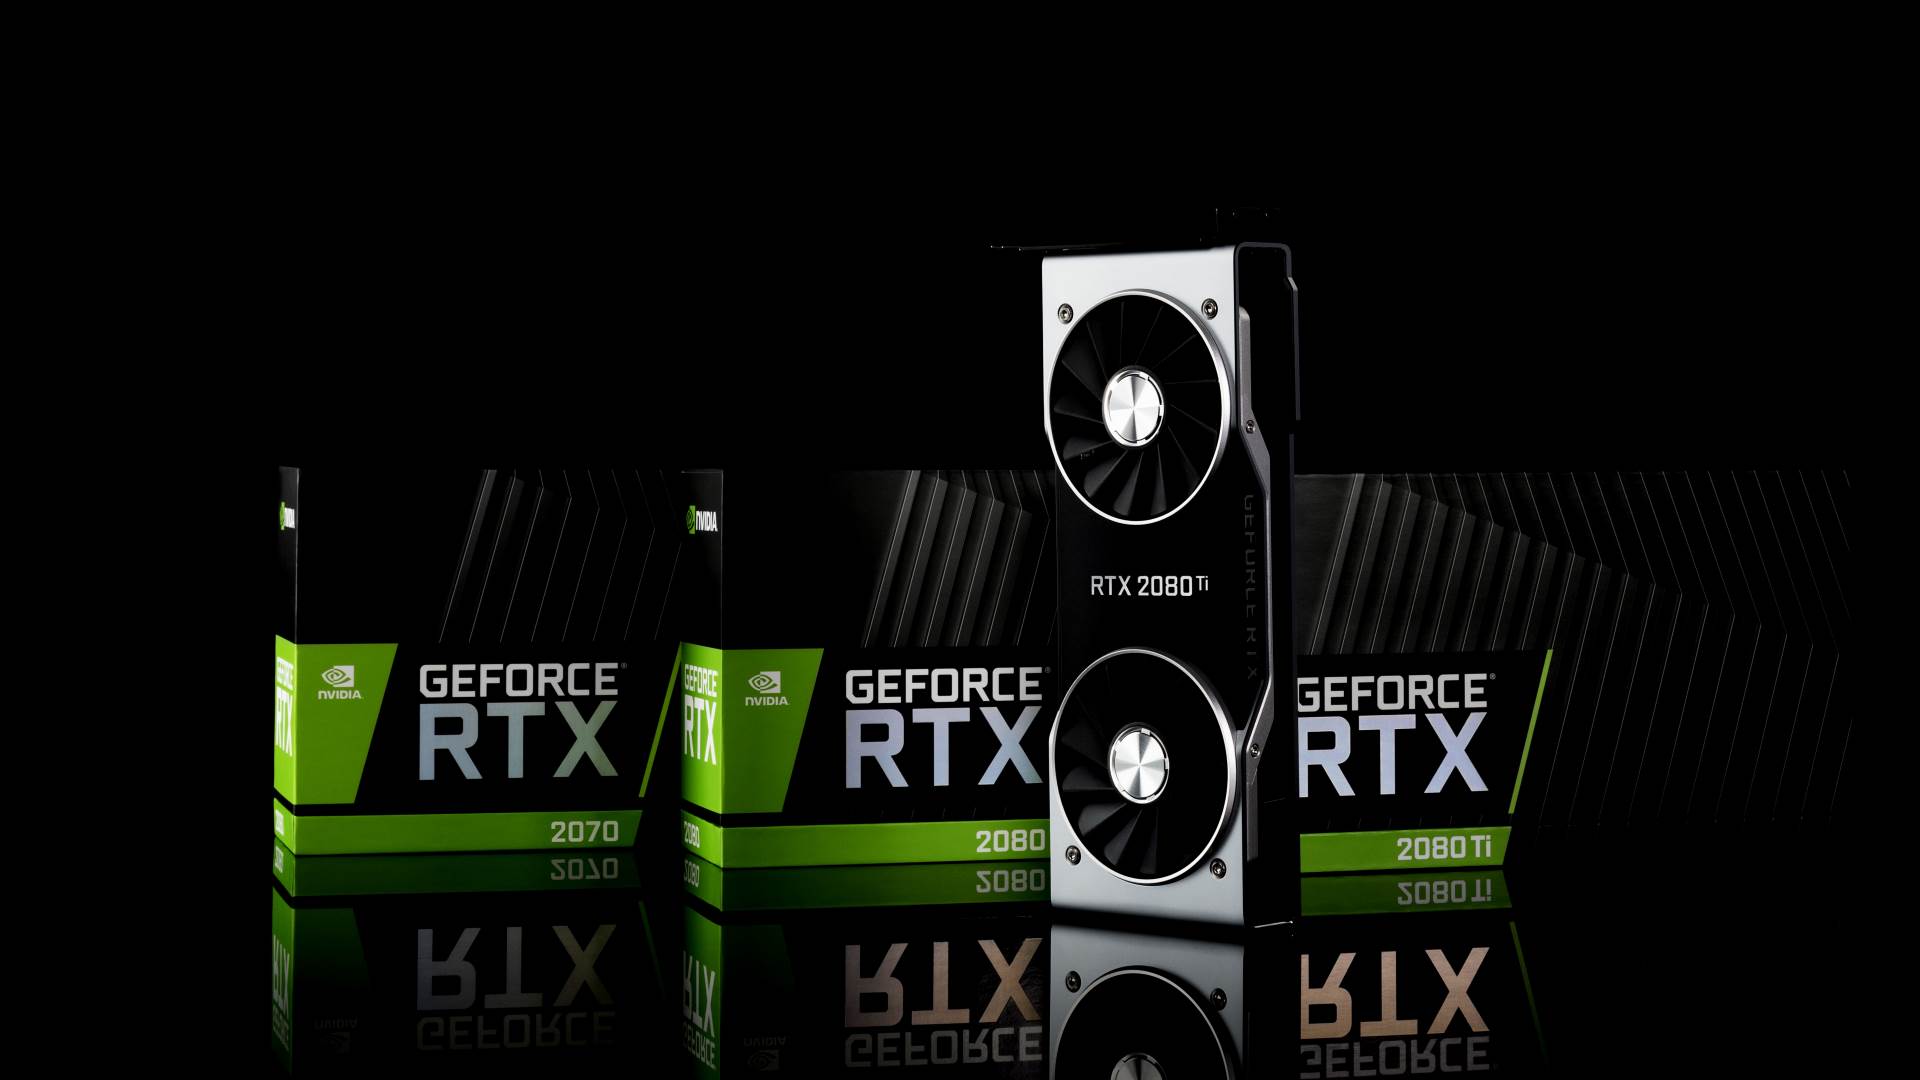 RTX 2080 Ti and RTX 2080 graphics cards 